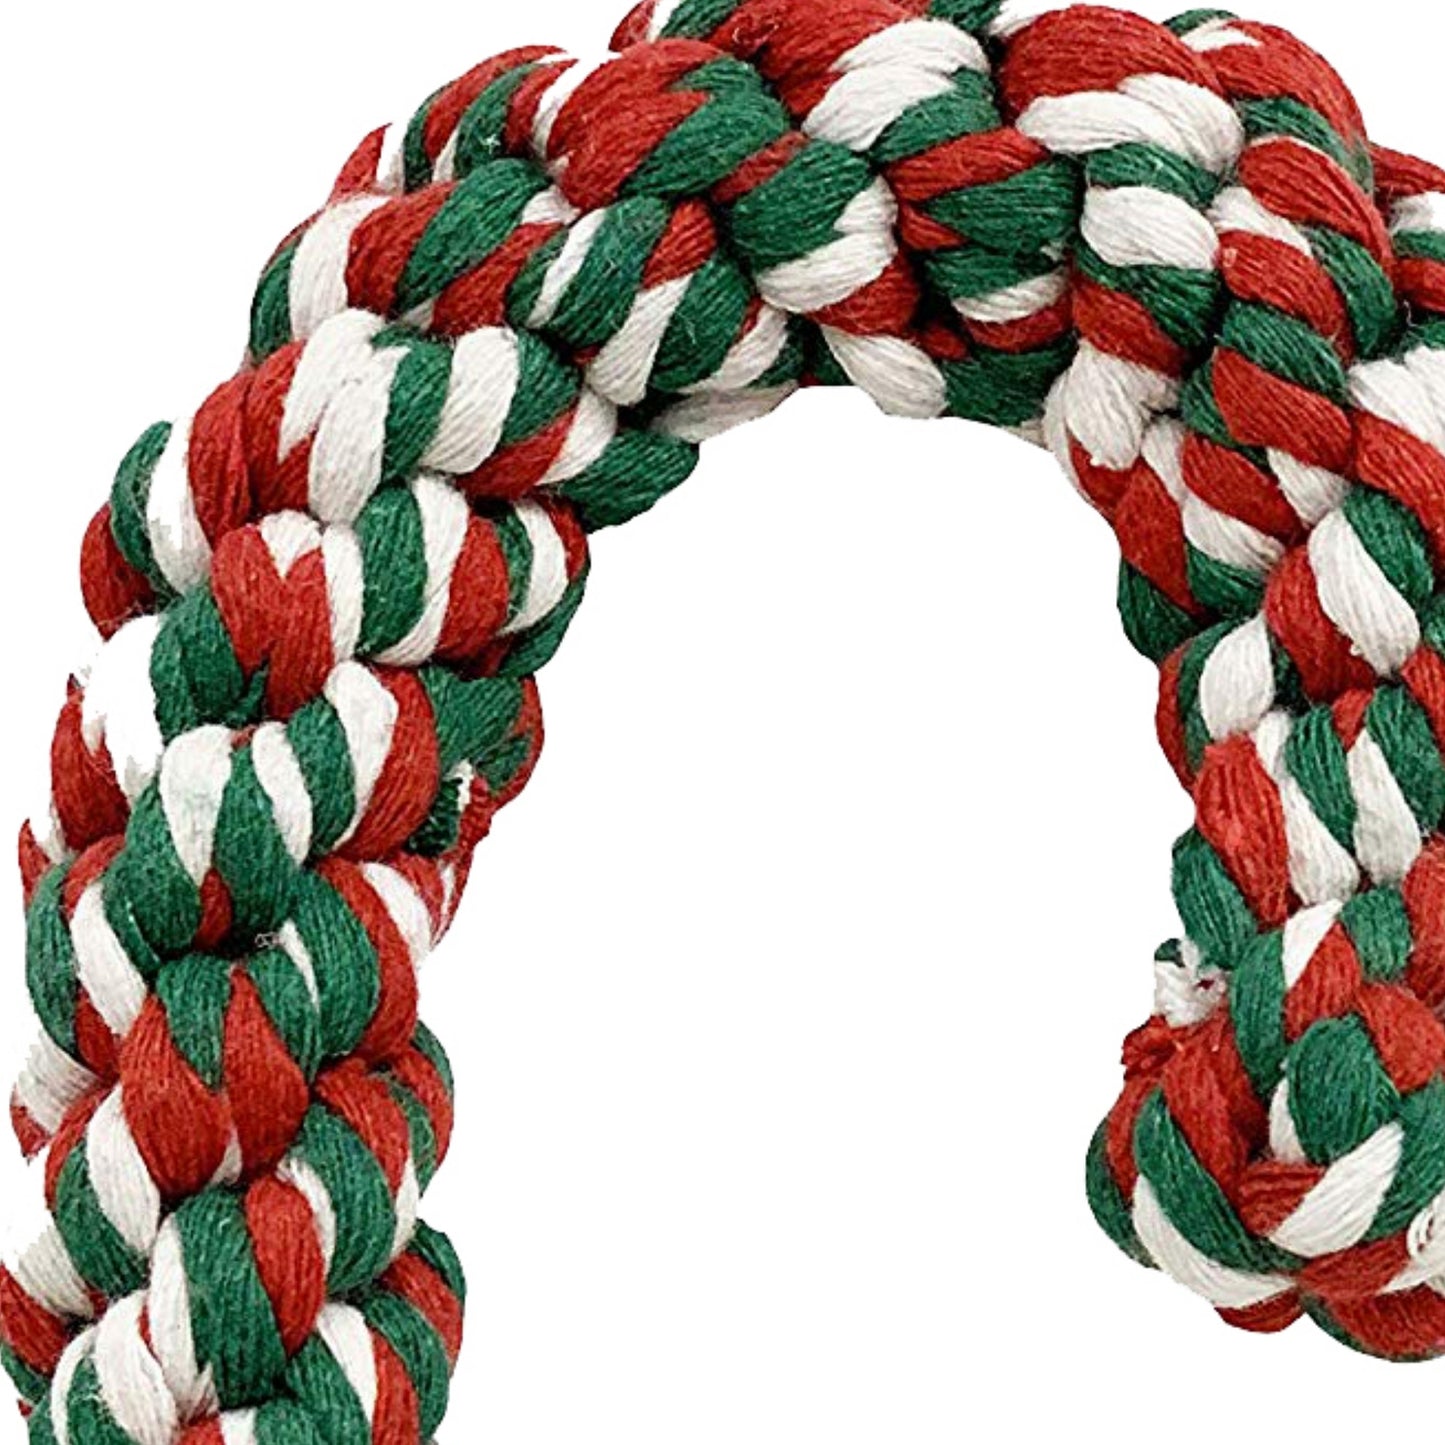 Midlee Candy Cane 8" Rope Dog Toy